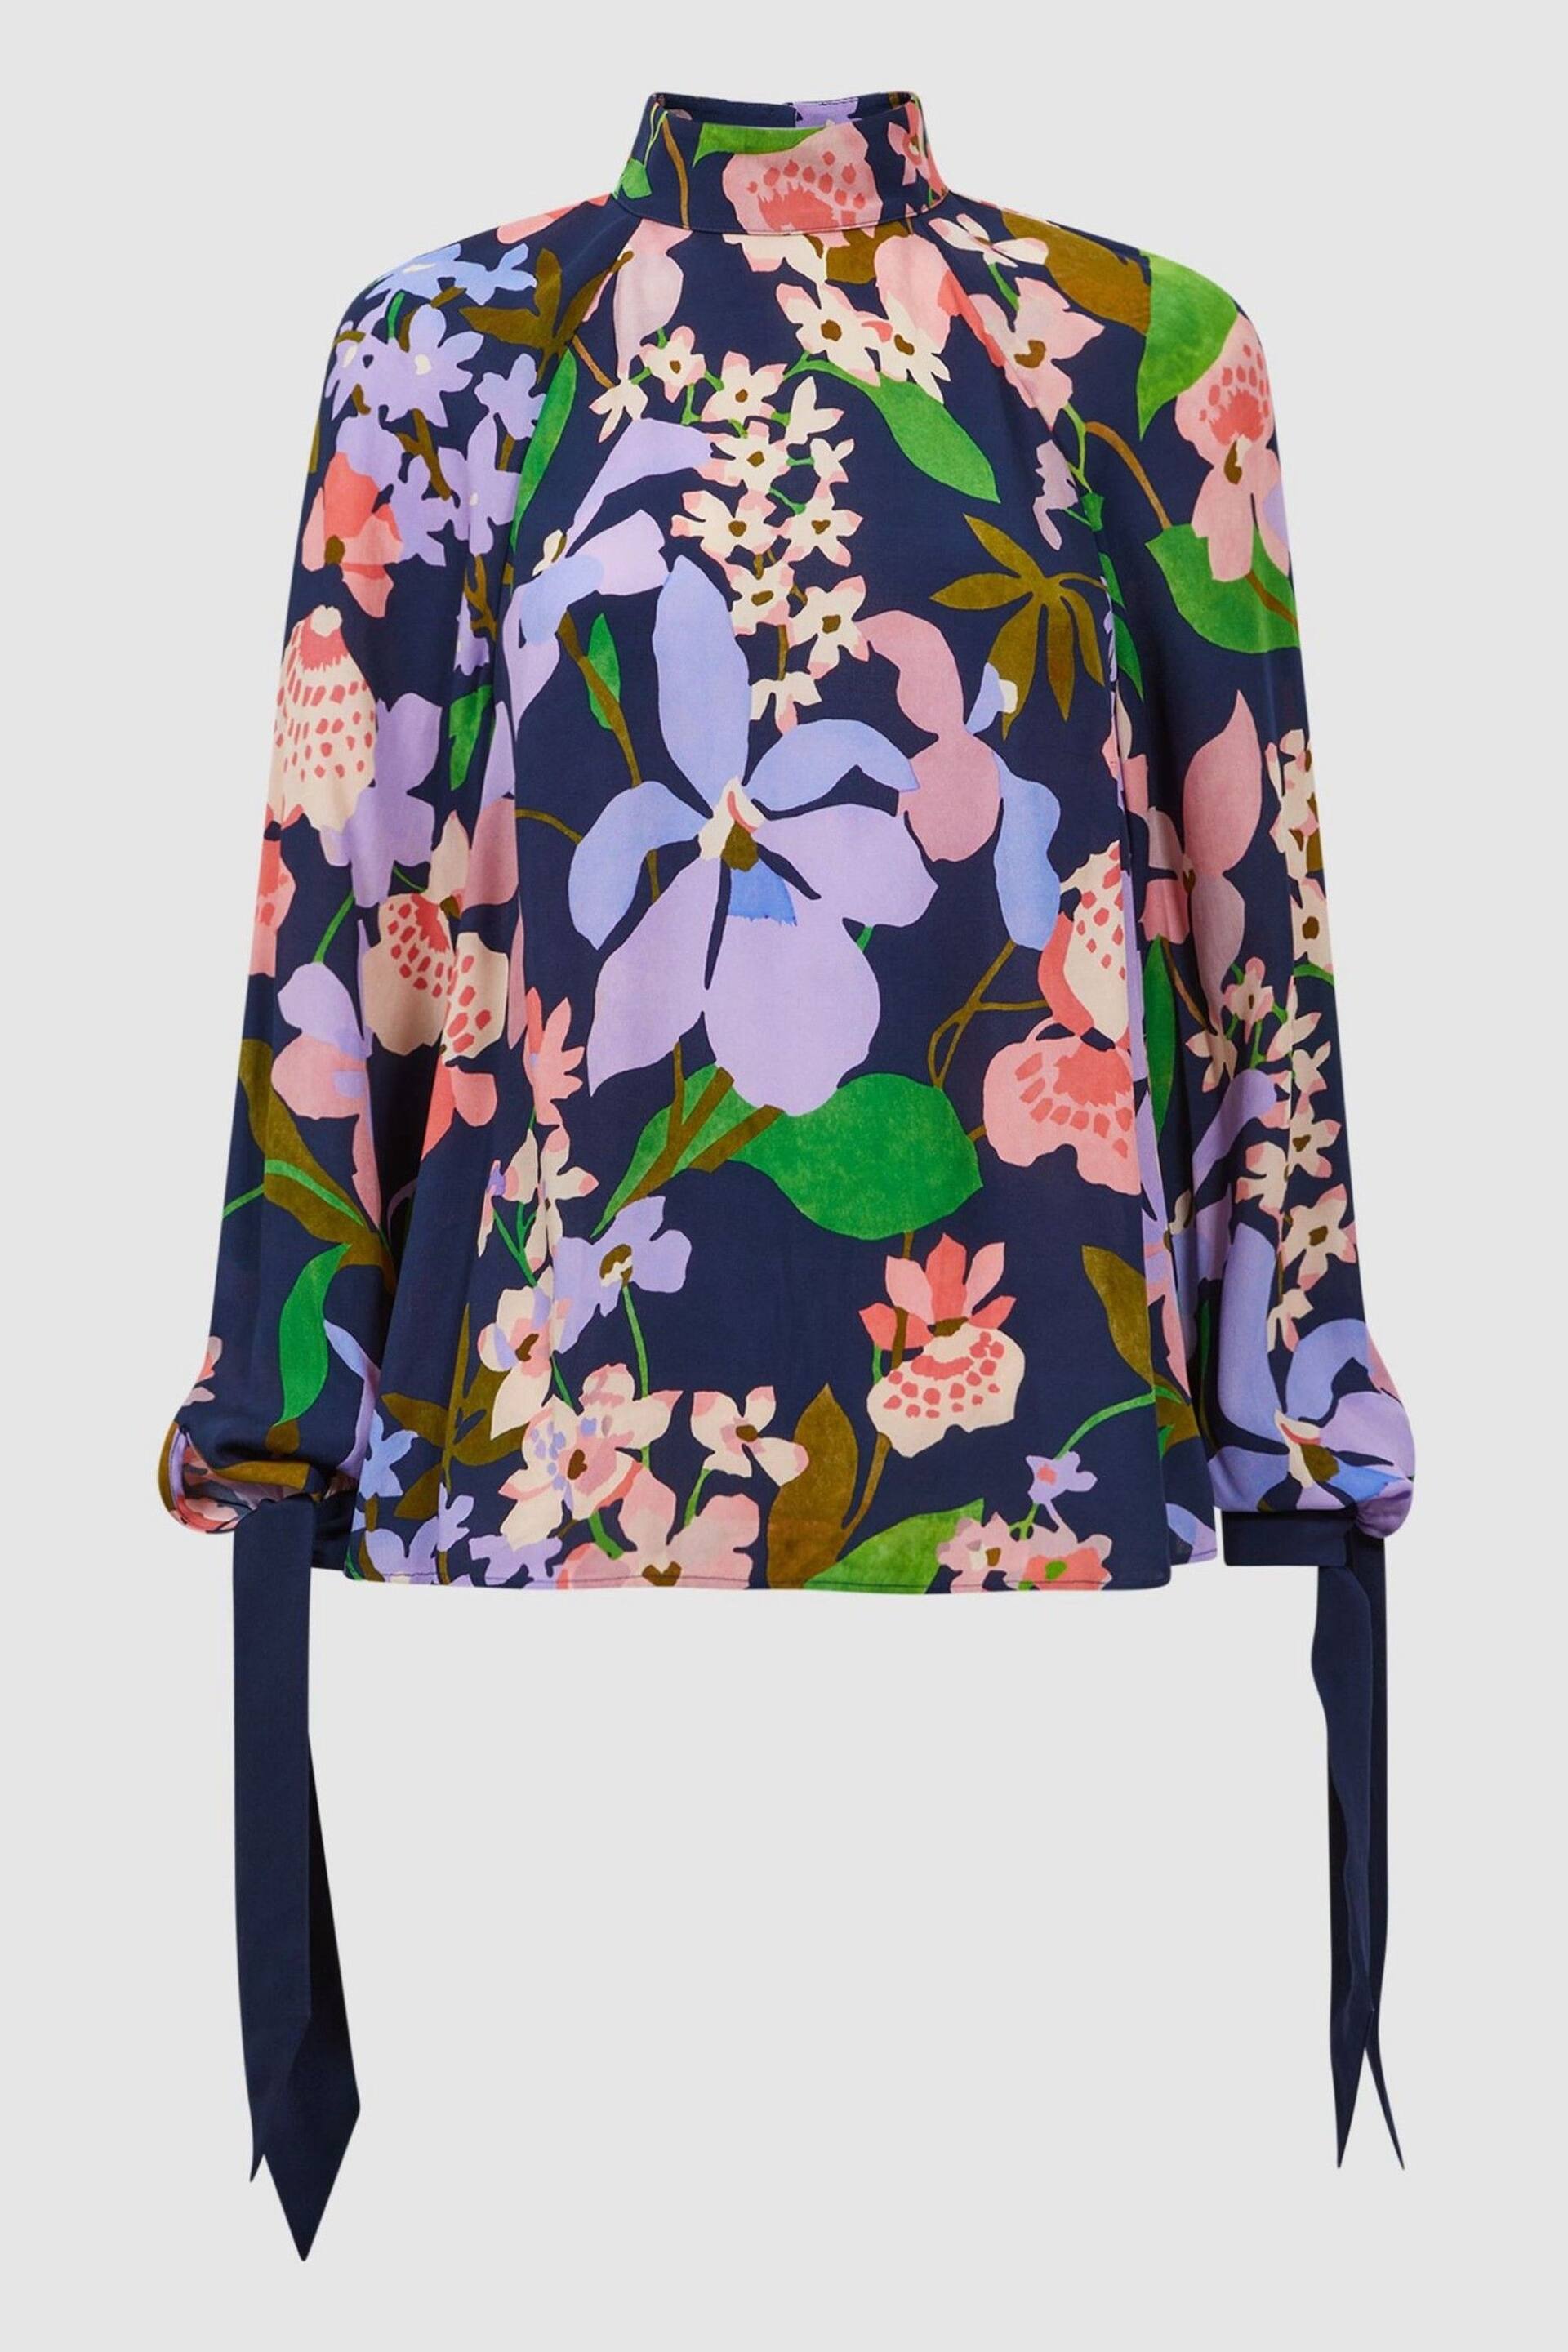 Florere Floral Long Sleeve Blouse - Image 2 of 5